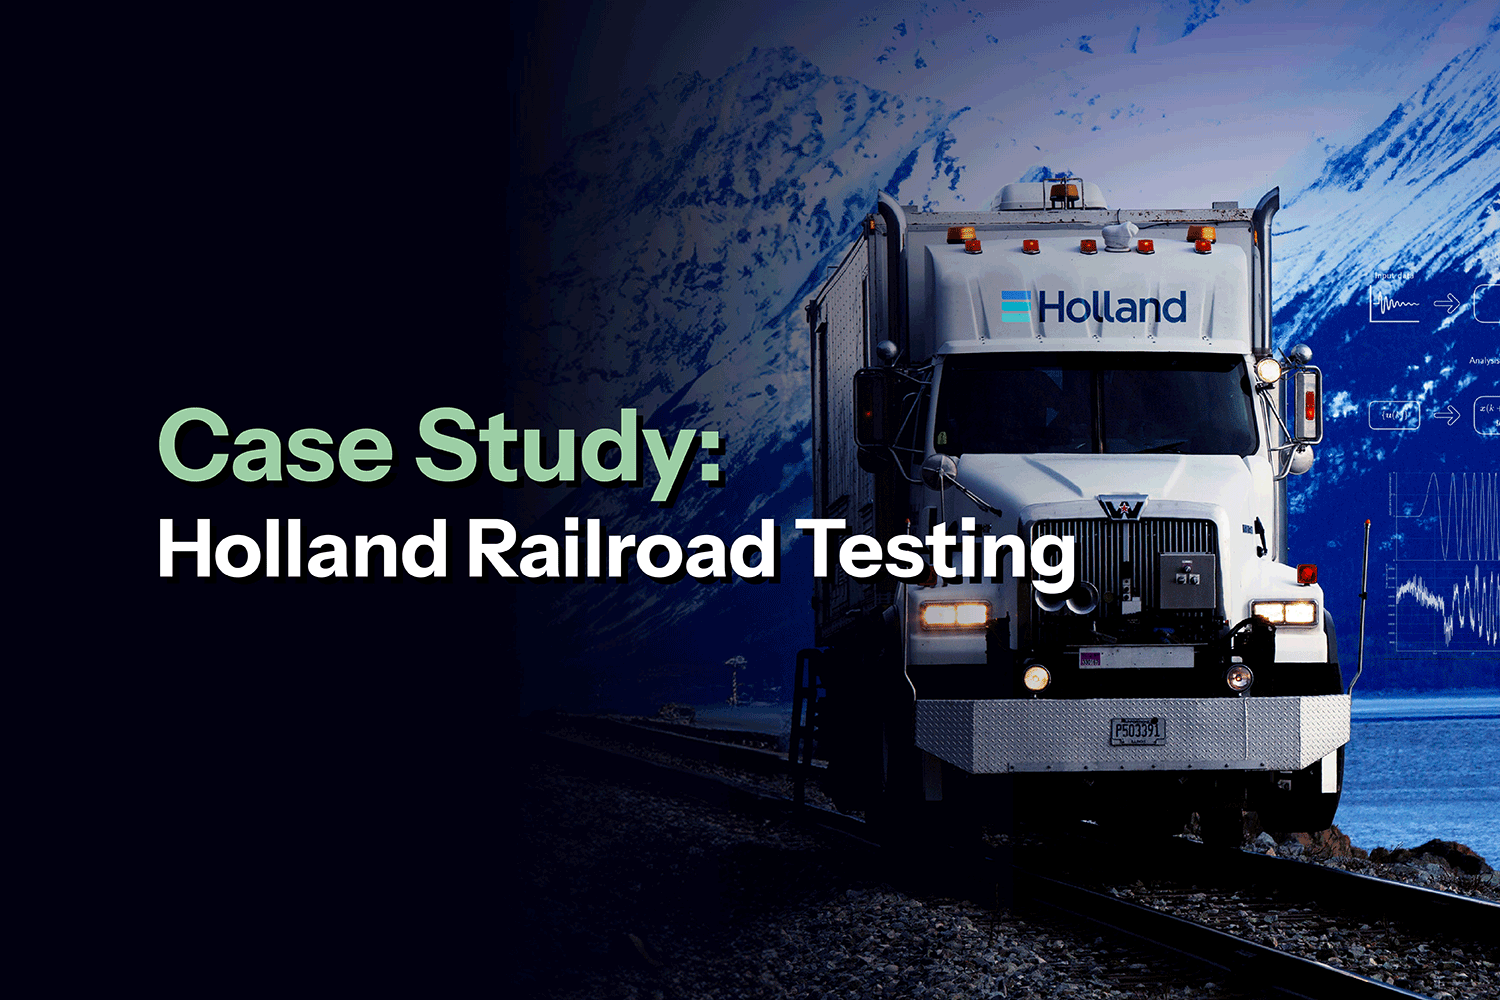 LSS-Knowledge-Center-Case-Study-Holland Railroad Testing-Card-Images-01